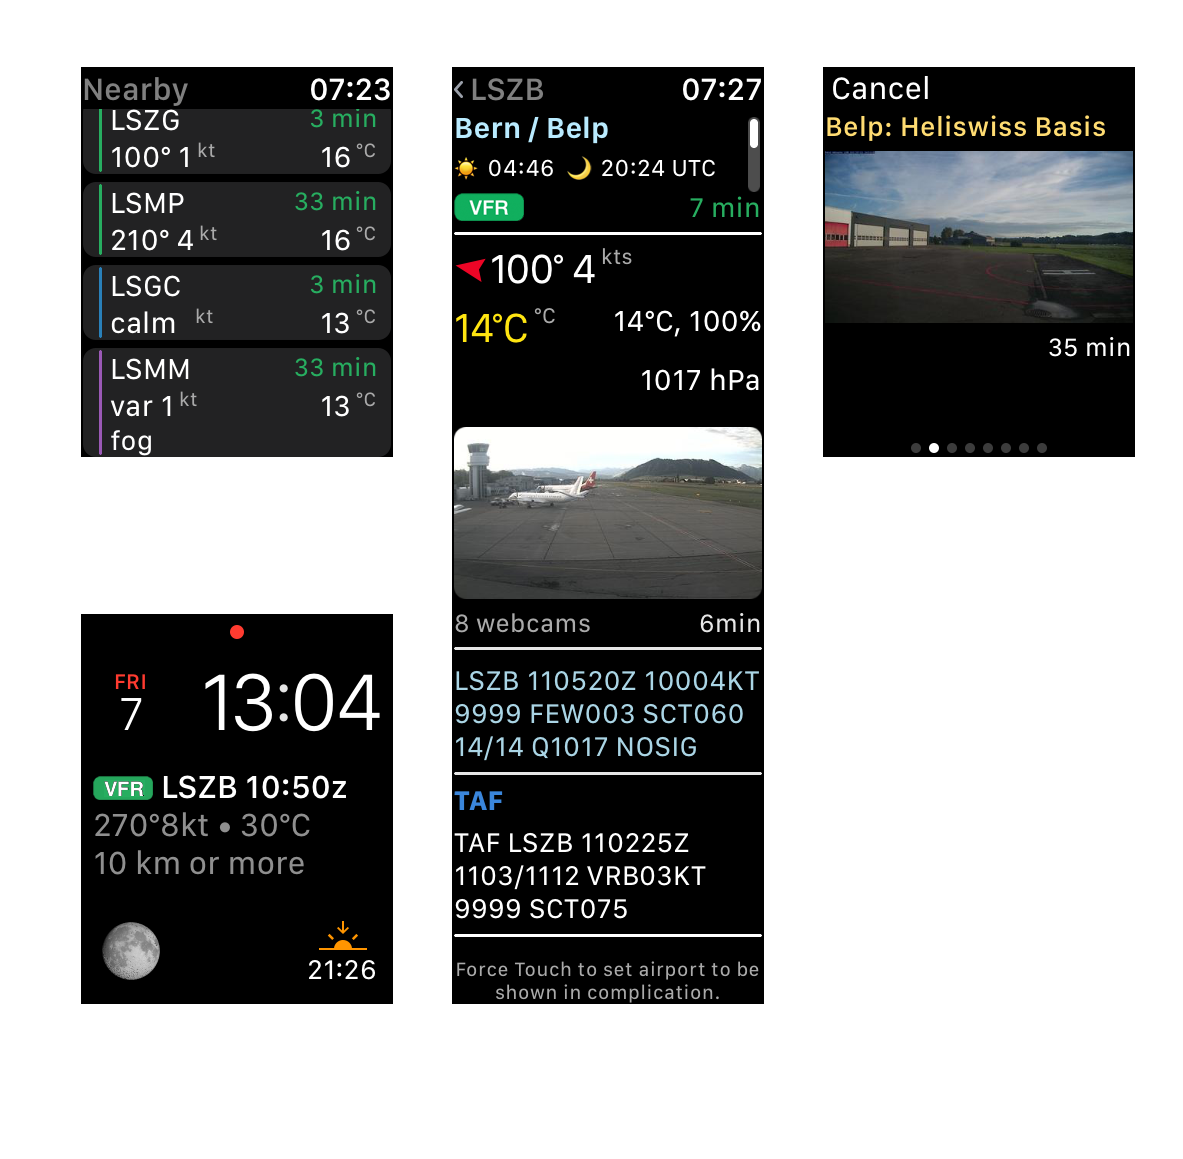 aeroweather app no longer shows decoded data